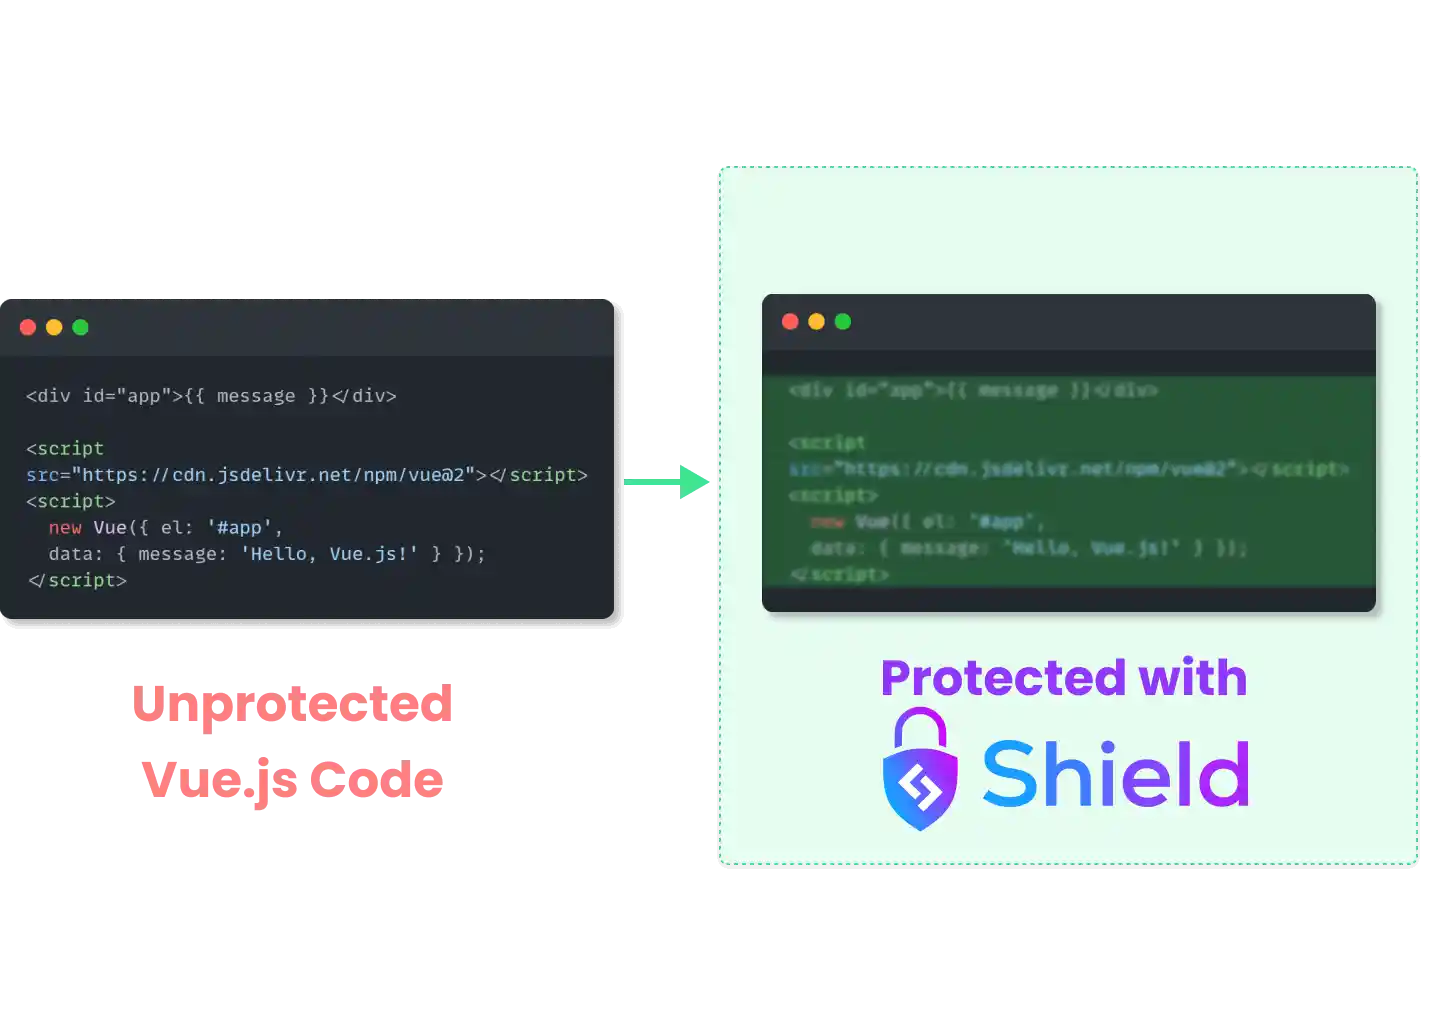 Intellectual property protection in Vue.js